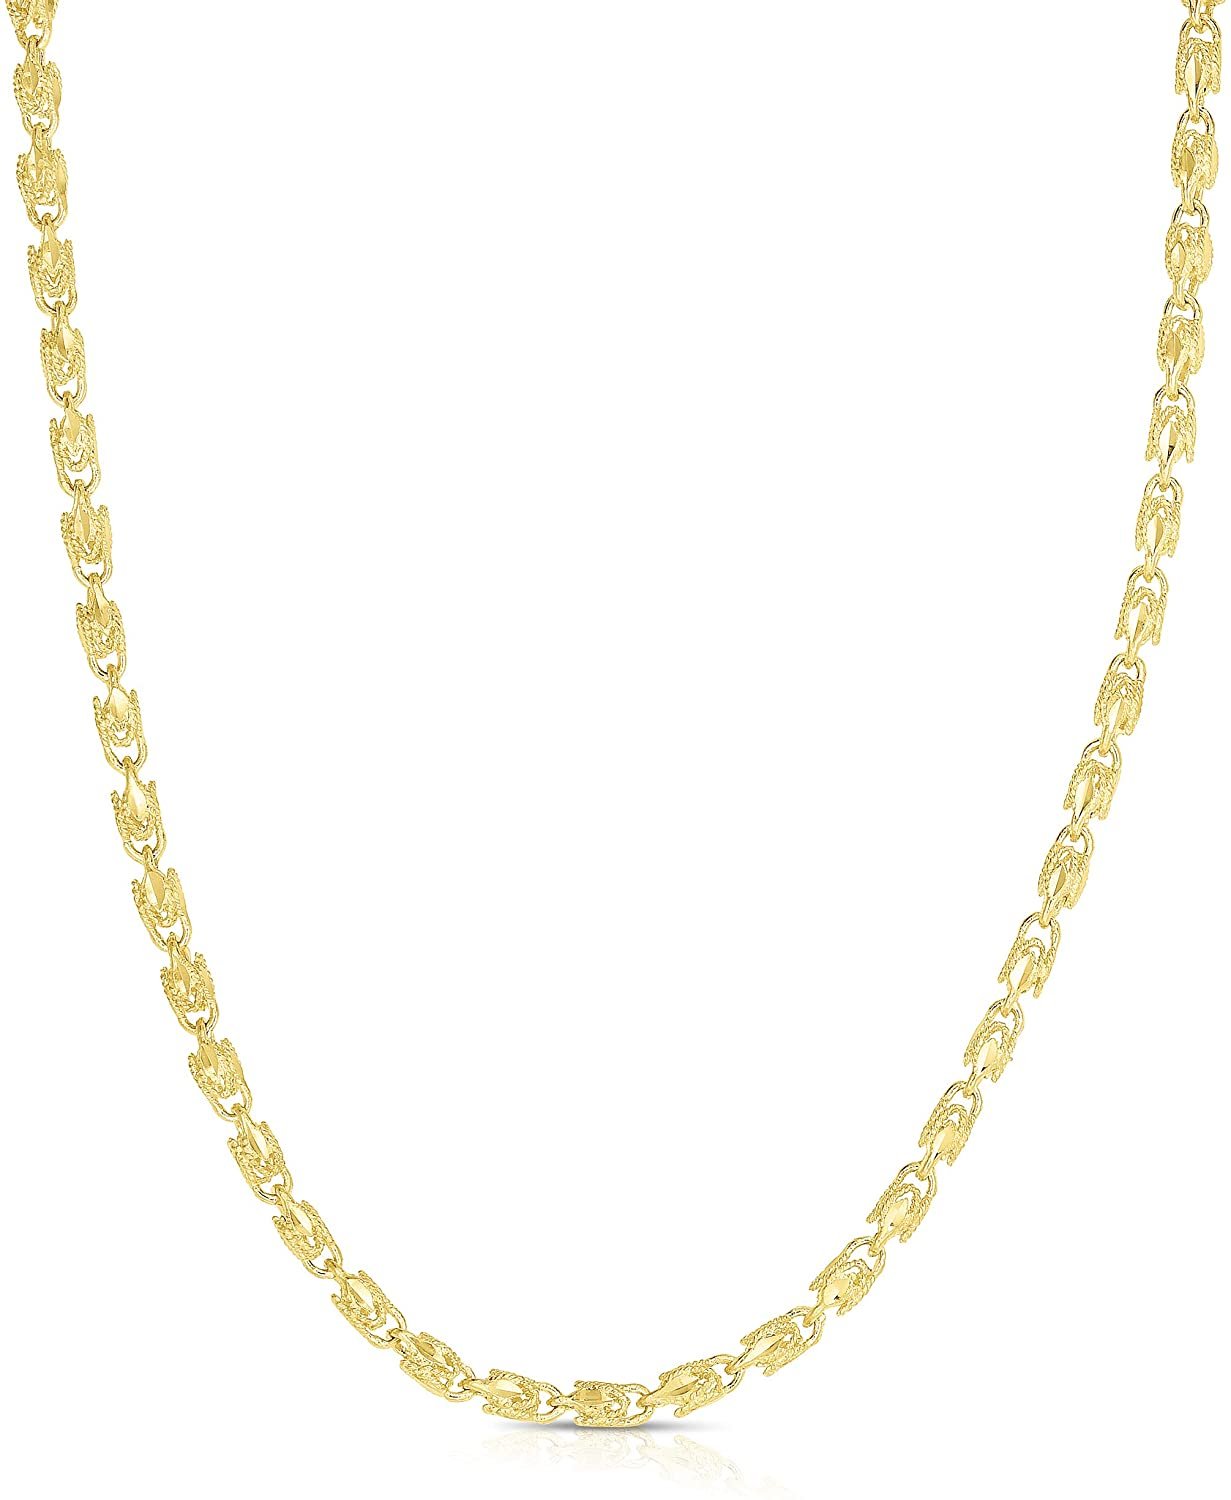 Floreo 10k Yellow Gold 2.5mm Solid Turkish Rope Chain Necklace